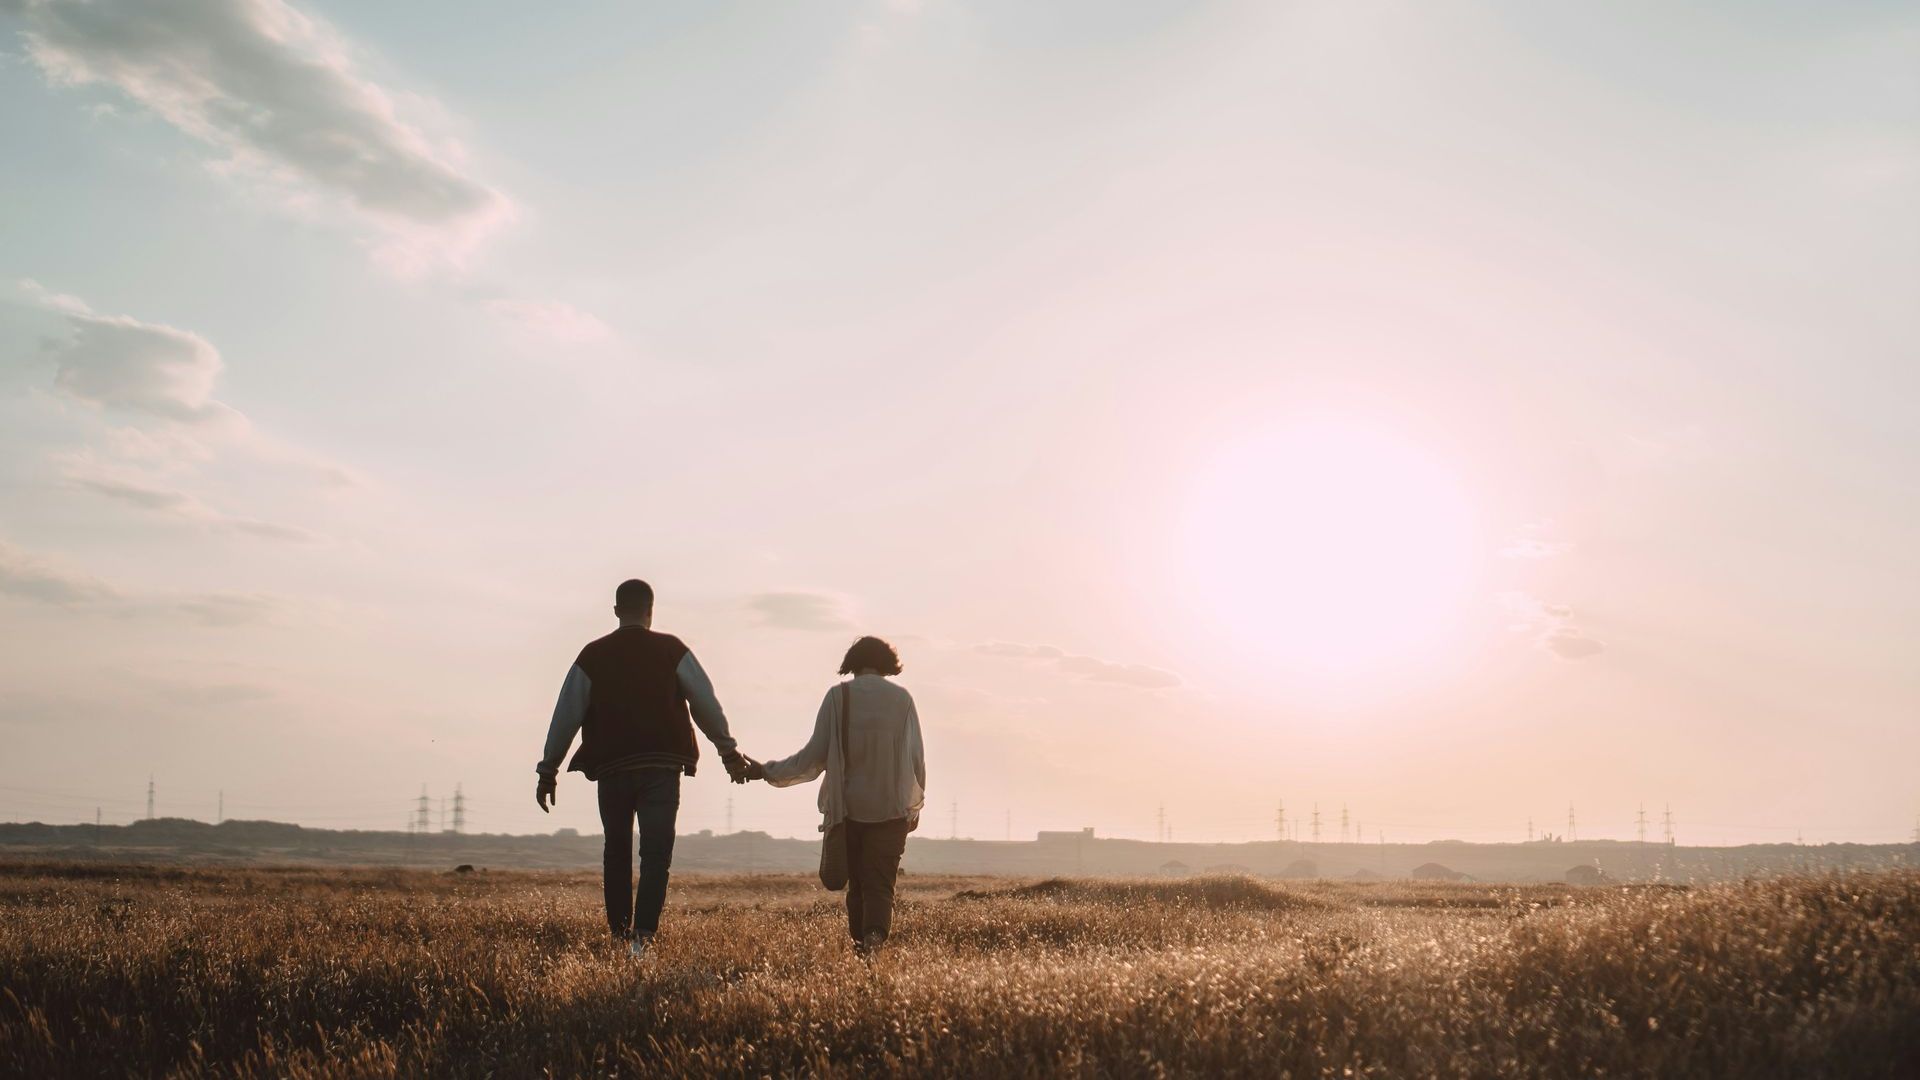 A man and a woman are holding hands while walking through a field at sunset.